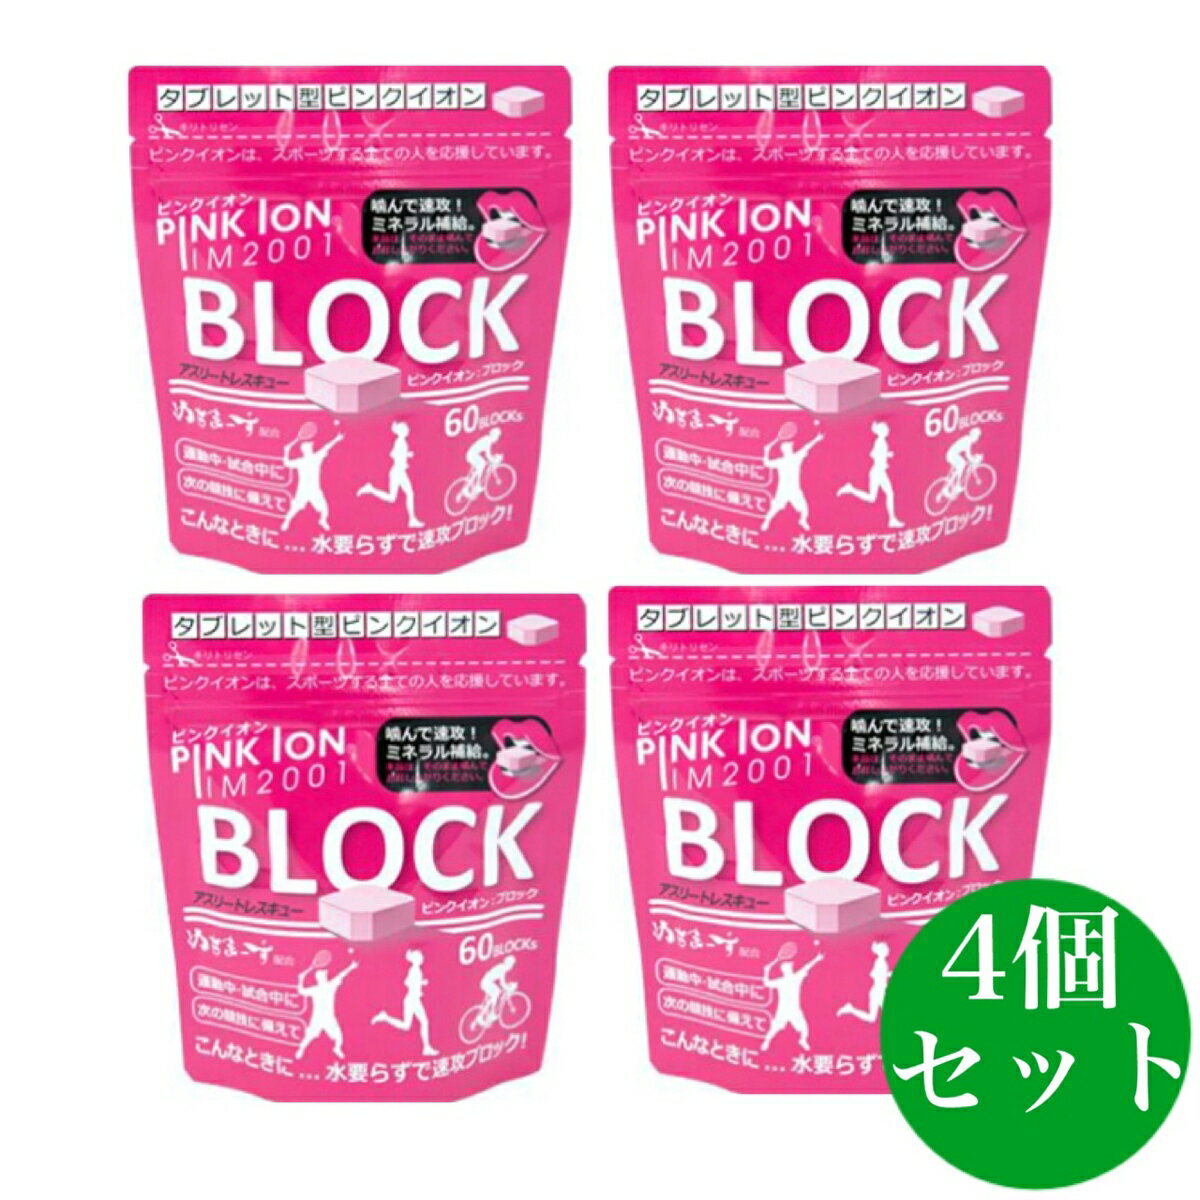 <strong>ピンクイオン</strong> ブロック60 ブロック 詰め替え用 PINK ION 4個セット